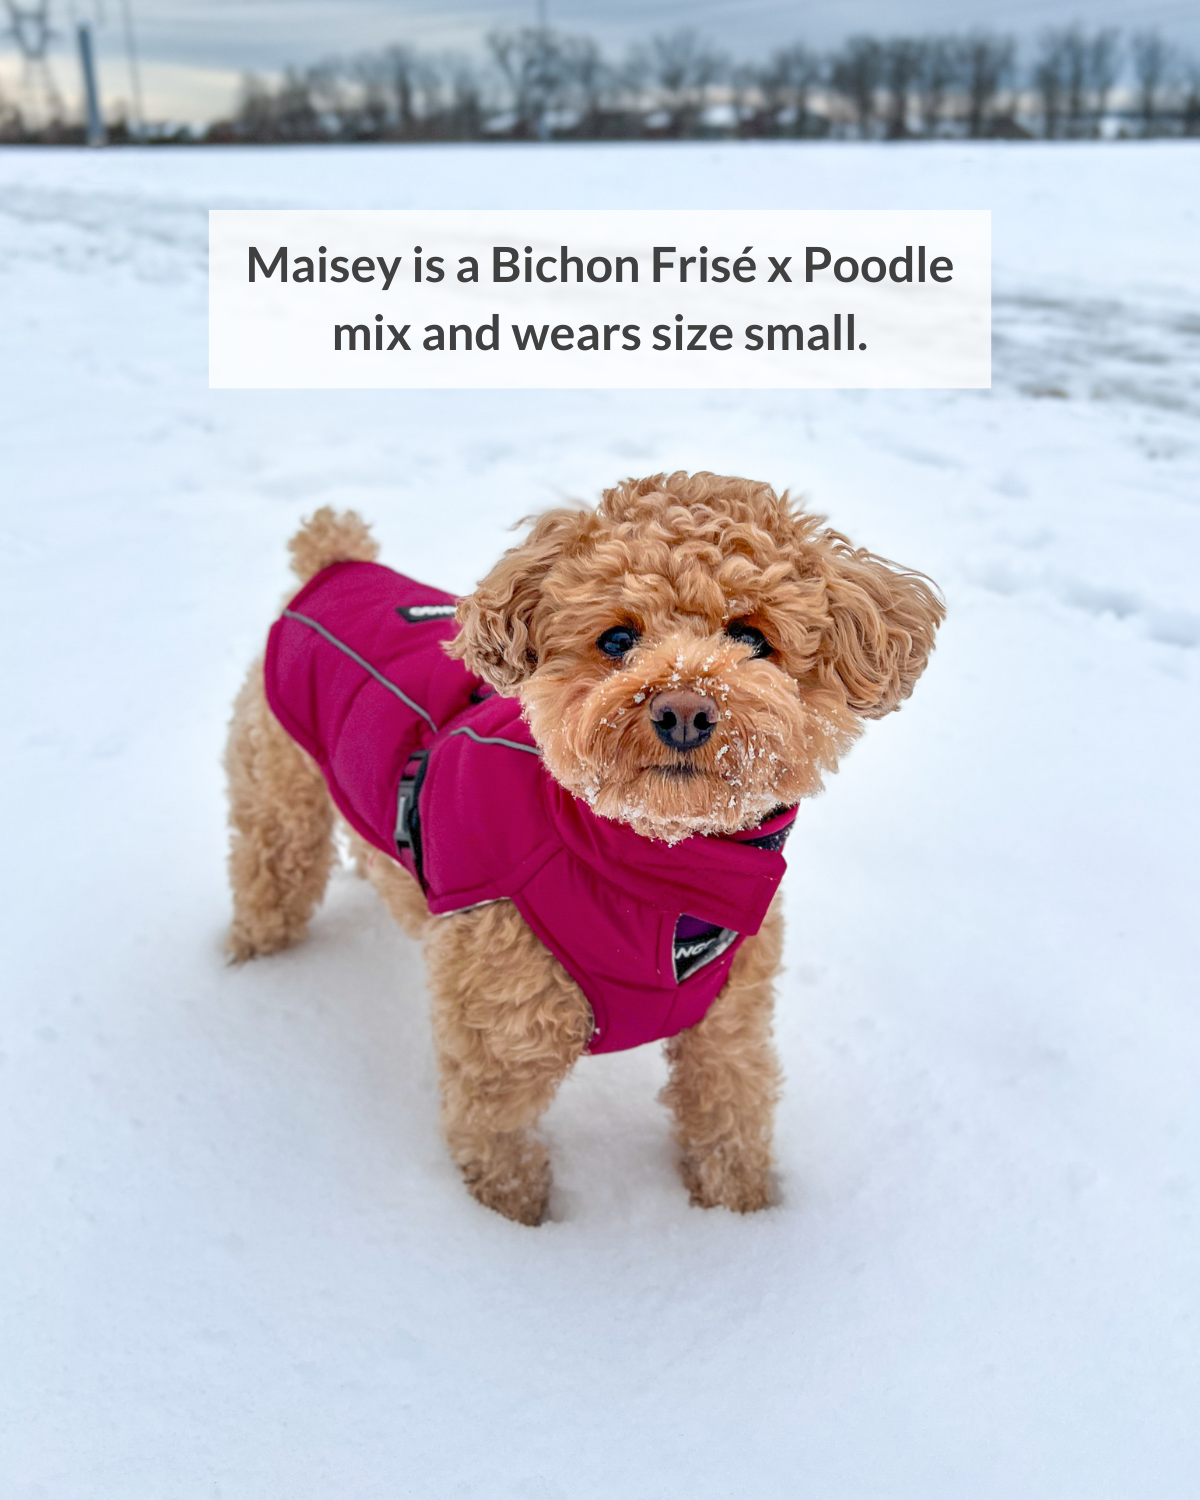 Designed for all winter weather, DJANGO's very warm and insulated winter dog coat will protect your dog during every cold weather outing and adventure. Maisey is a Bichon Frise and Poodle mix and wears size small perfectly - djangobrand.com